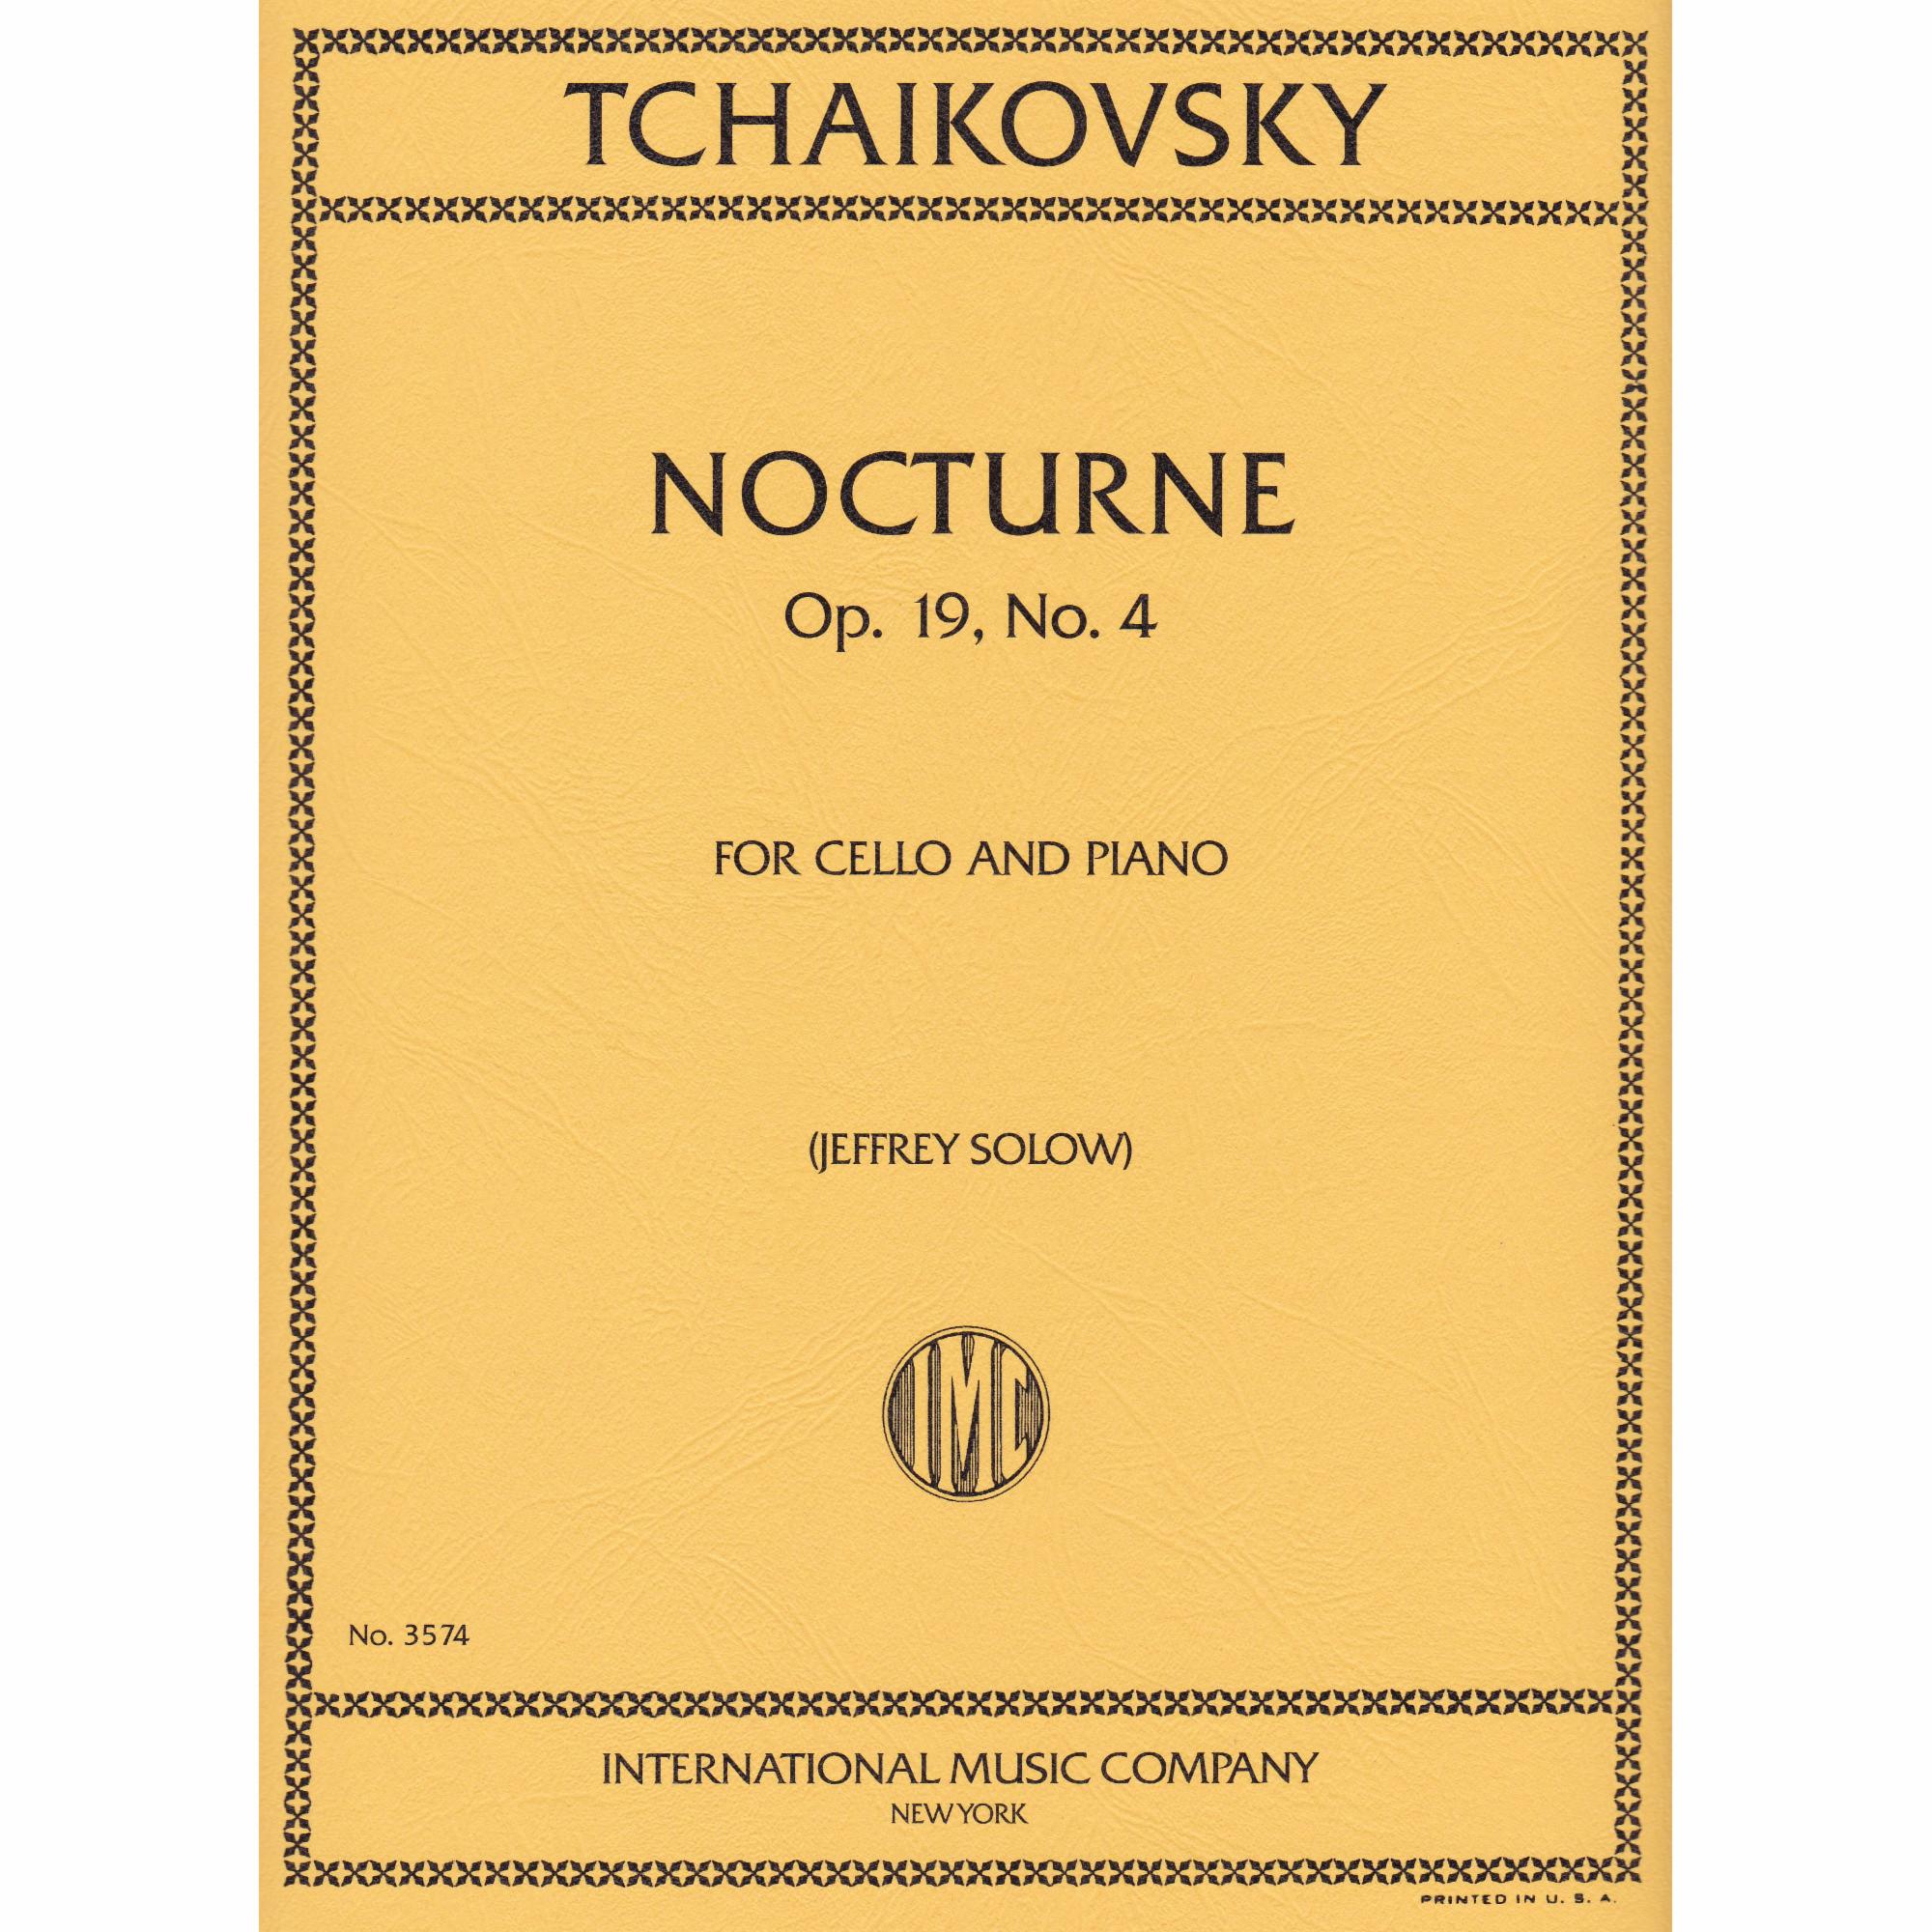 Nocturne in D Minor for Cello and Piano, Op. 19, No. 4